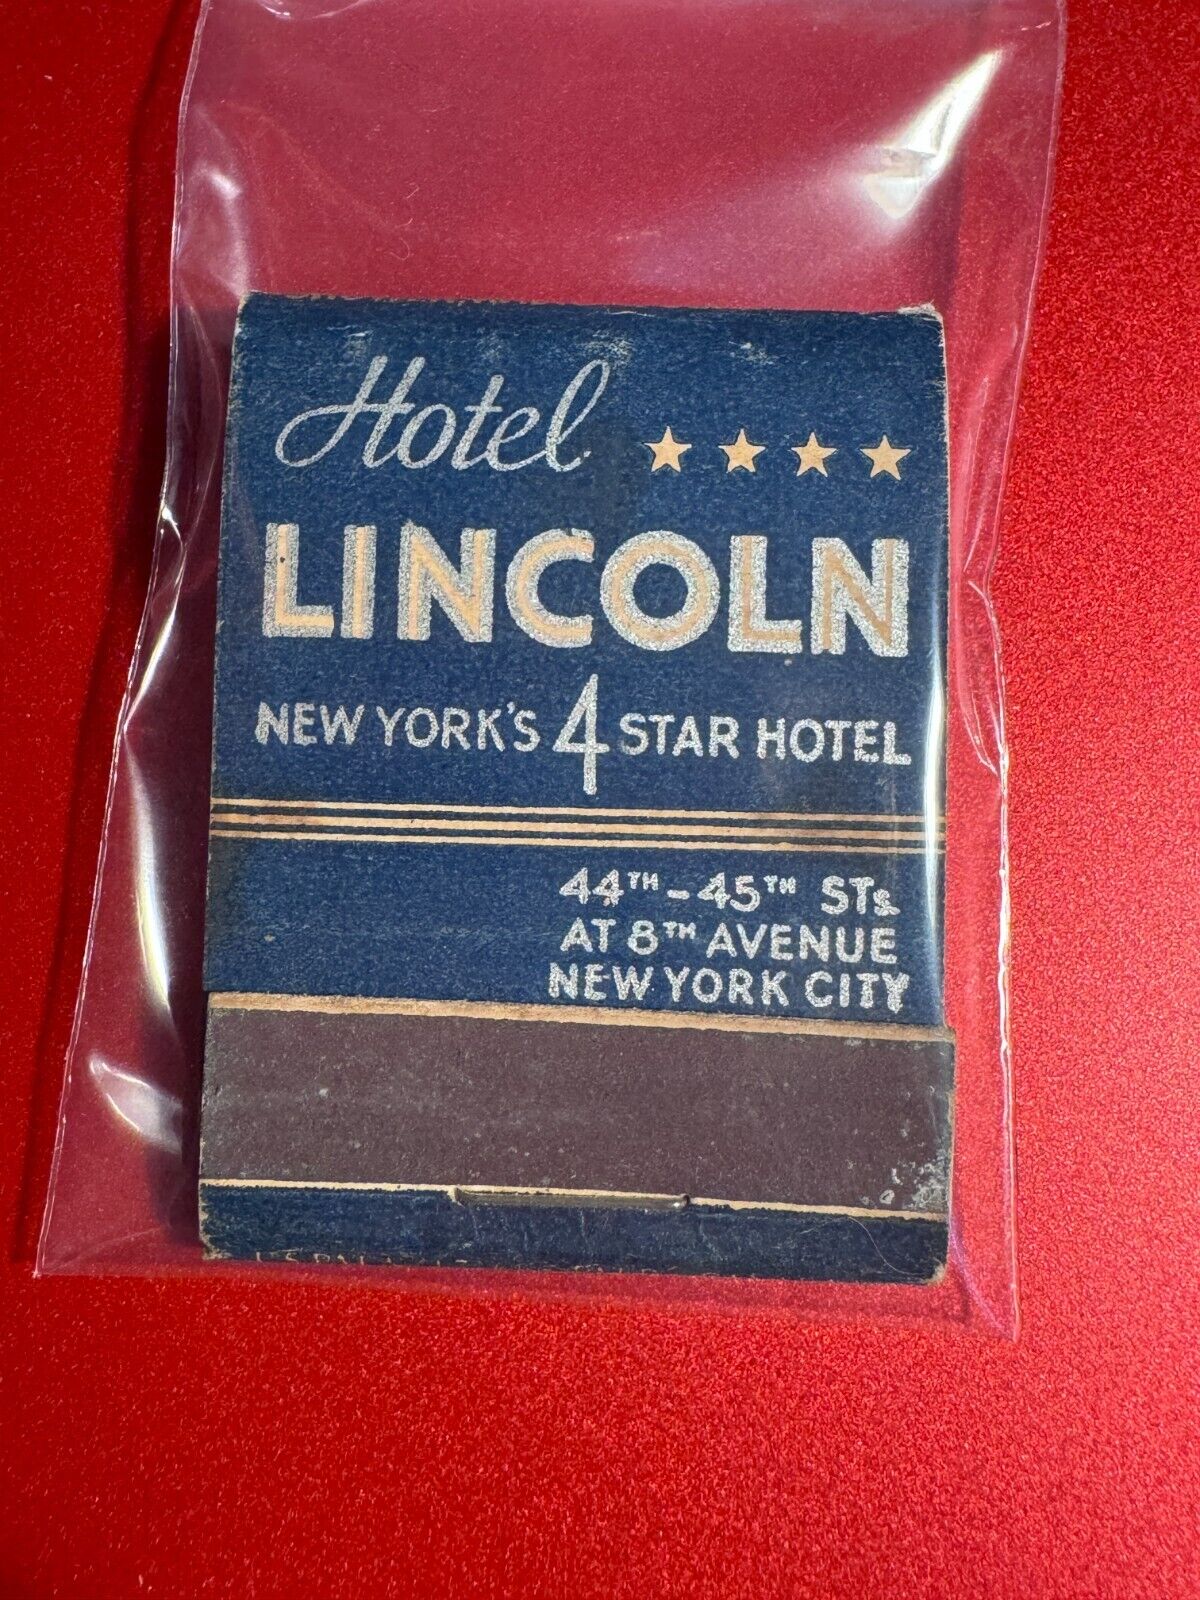 MATCHBOOK - HOTEL LINCOLN - NEW YORK, NY - UNSTRUCK